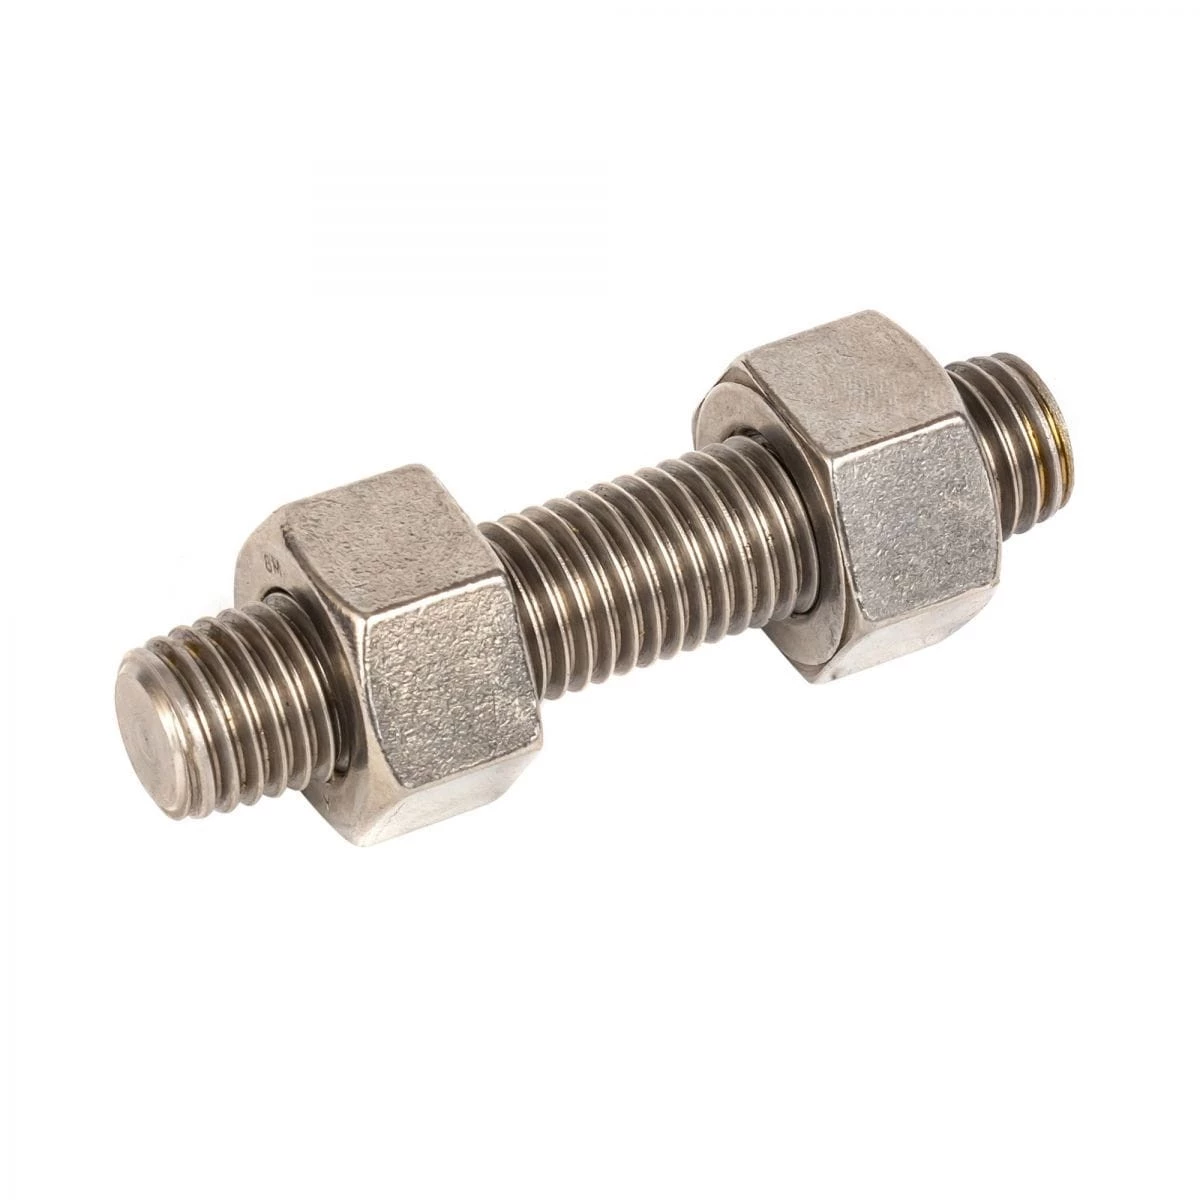 Fully Threaded Stud Bolt with 2 Hex Nuts, 3/4 Inch, 10 UNC